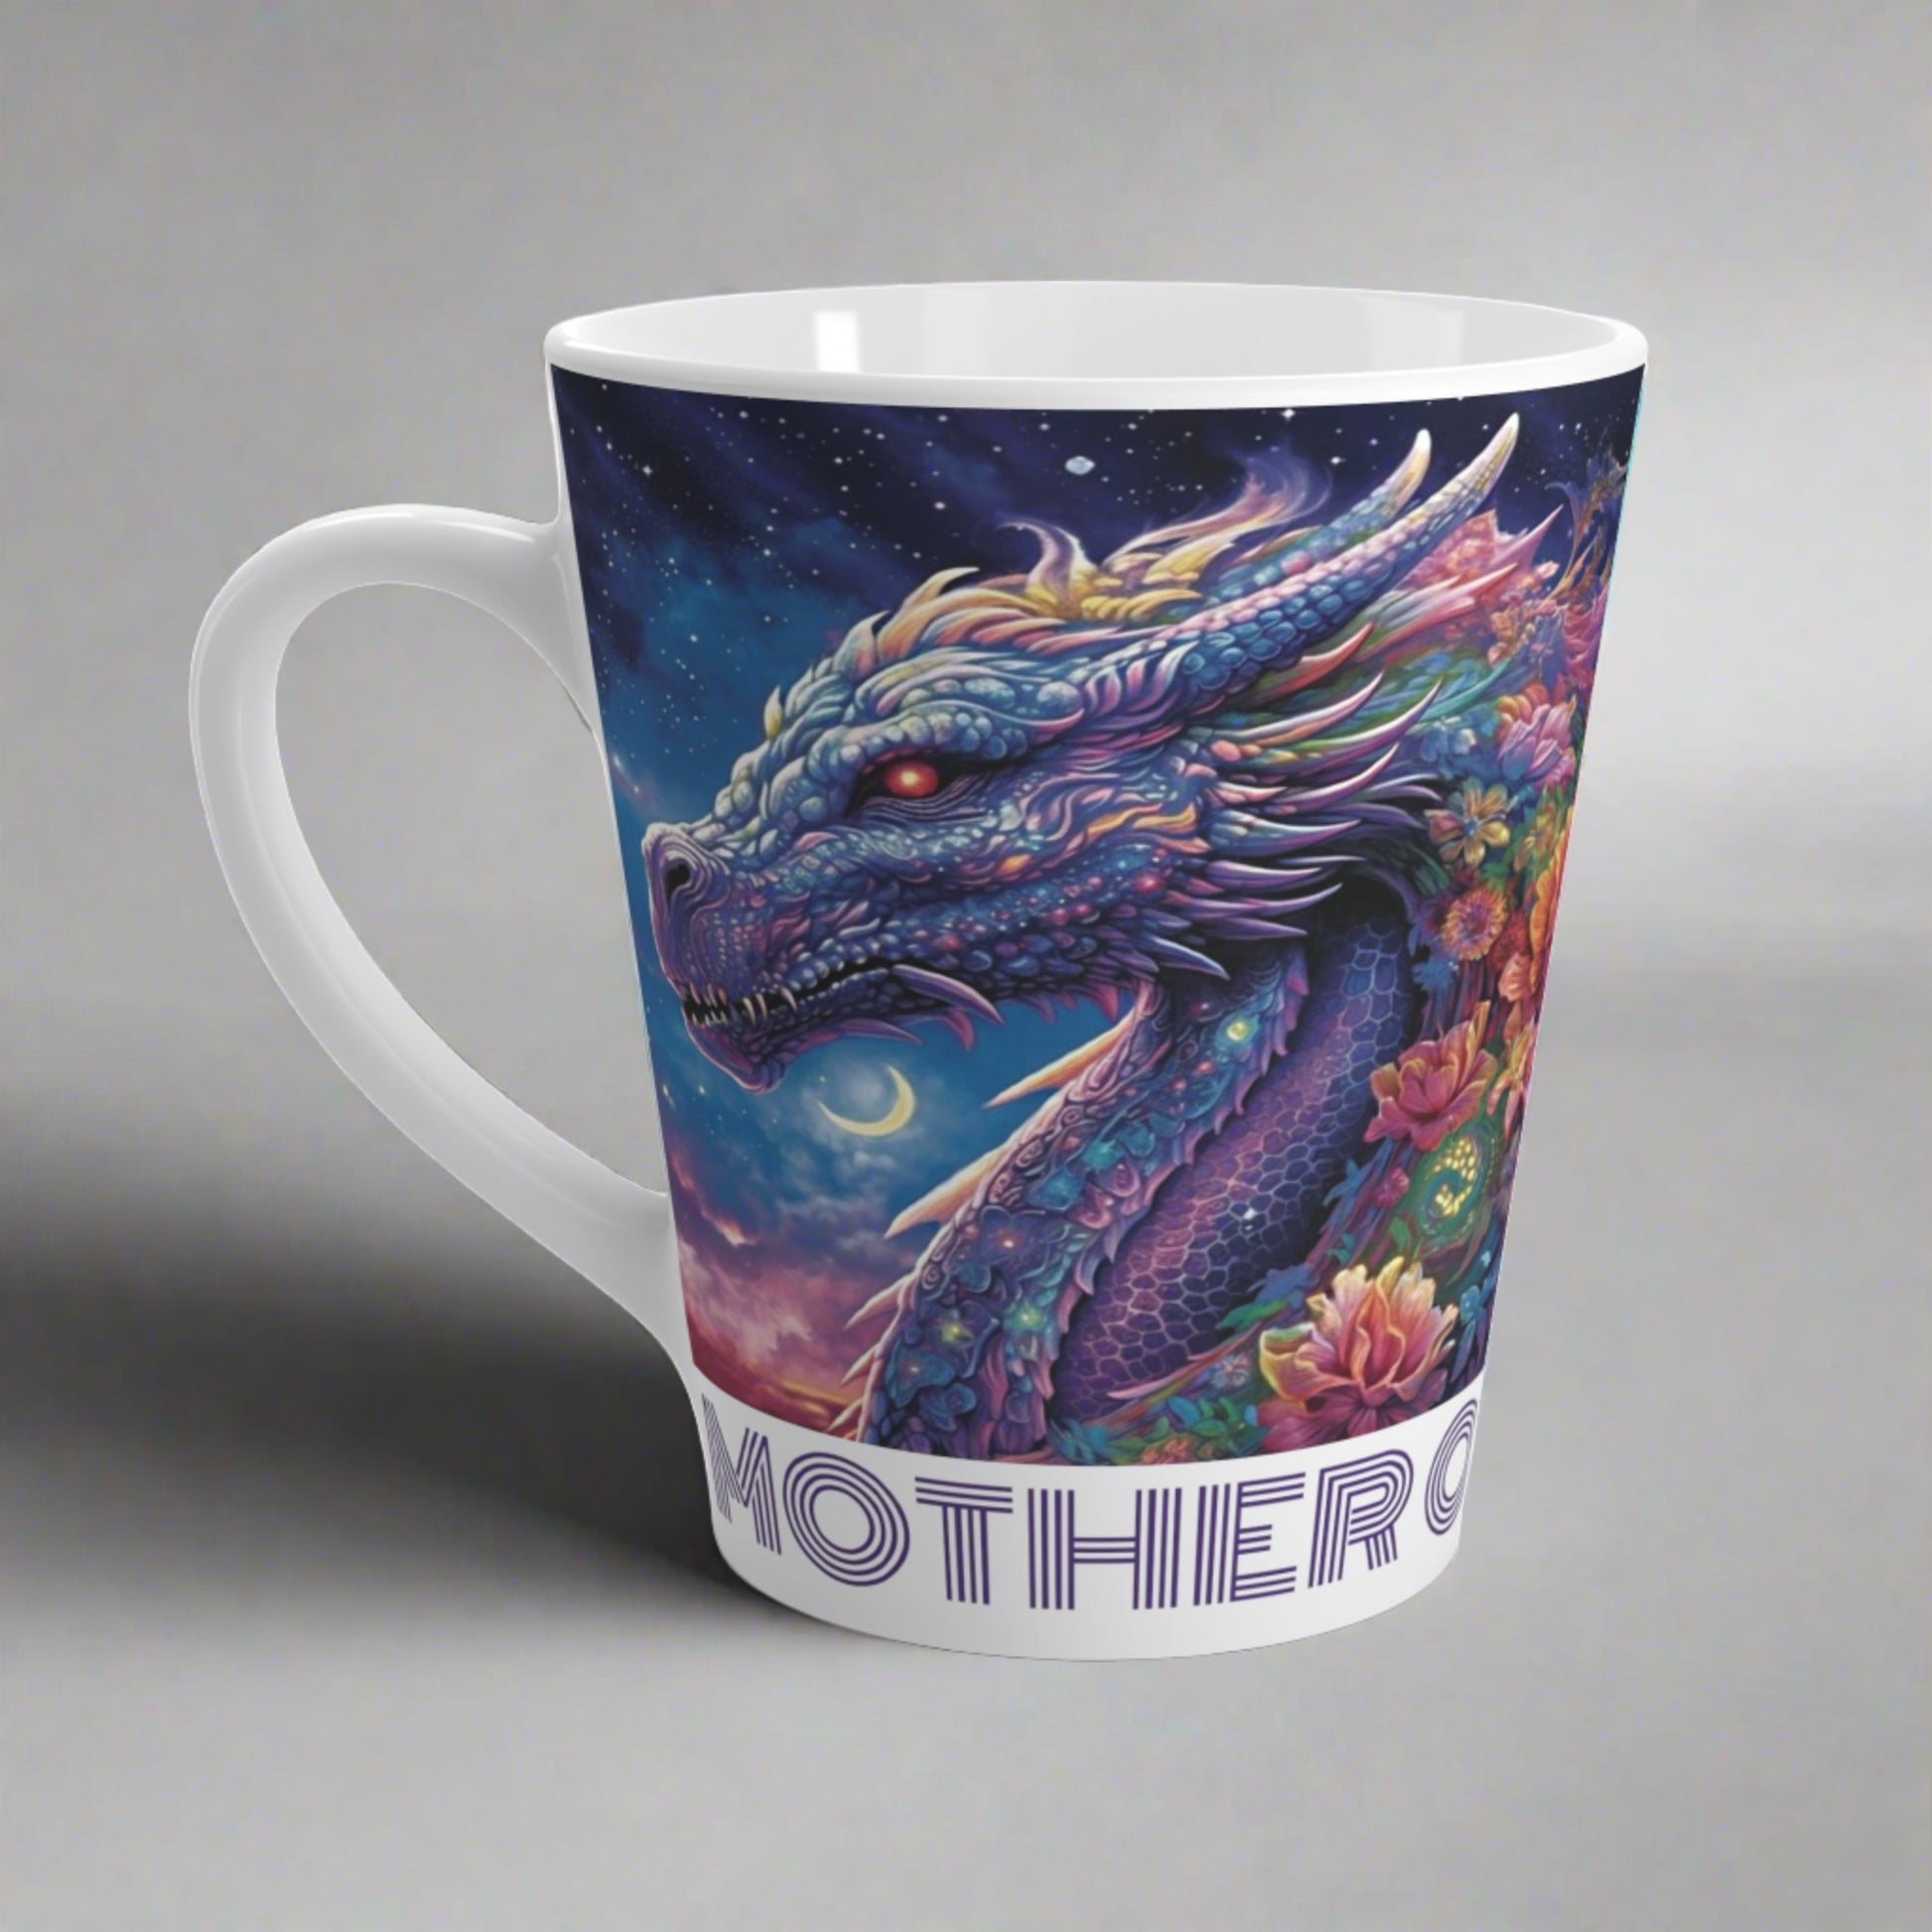 beautiful watercolor flowered dragon backs up onto another matching image on the other side - message at the bottom in decorative text is Mother Of Dragons